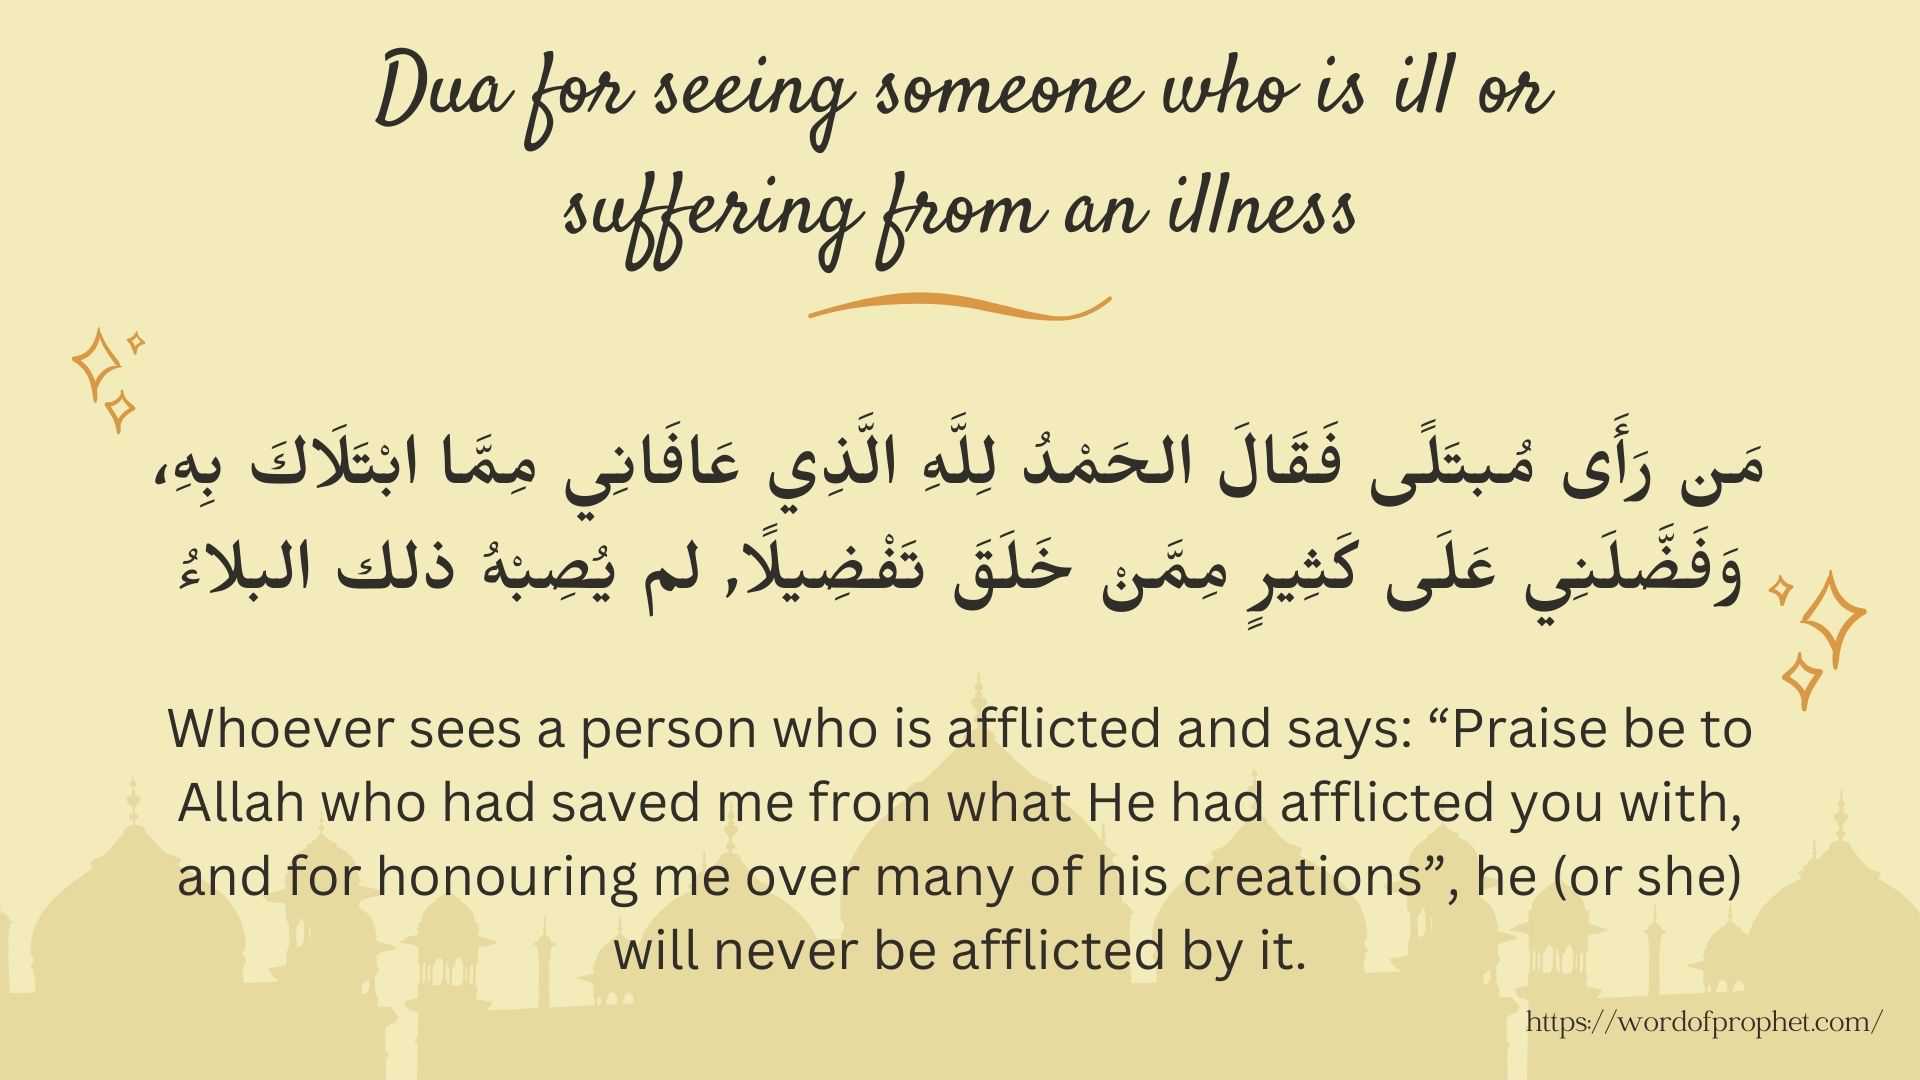 Dua for seeing someone who is ill or suffering from an illness